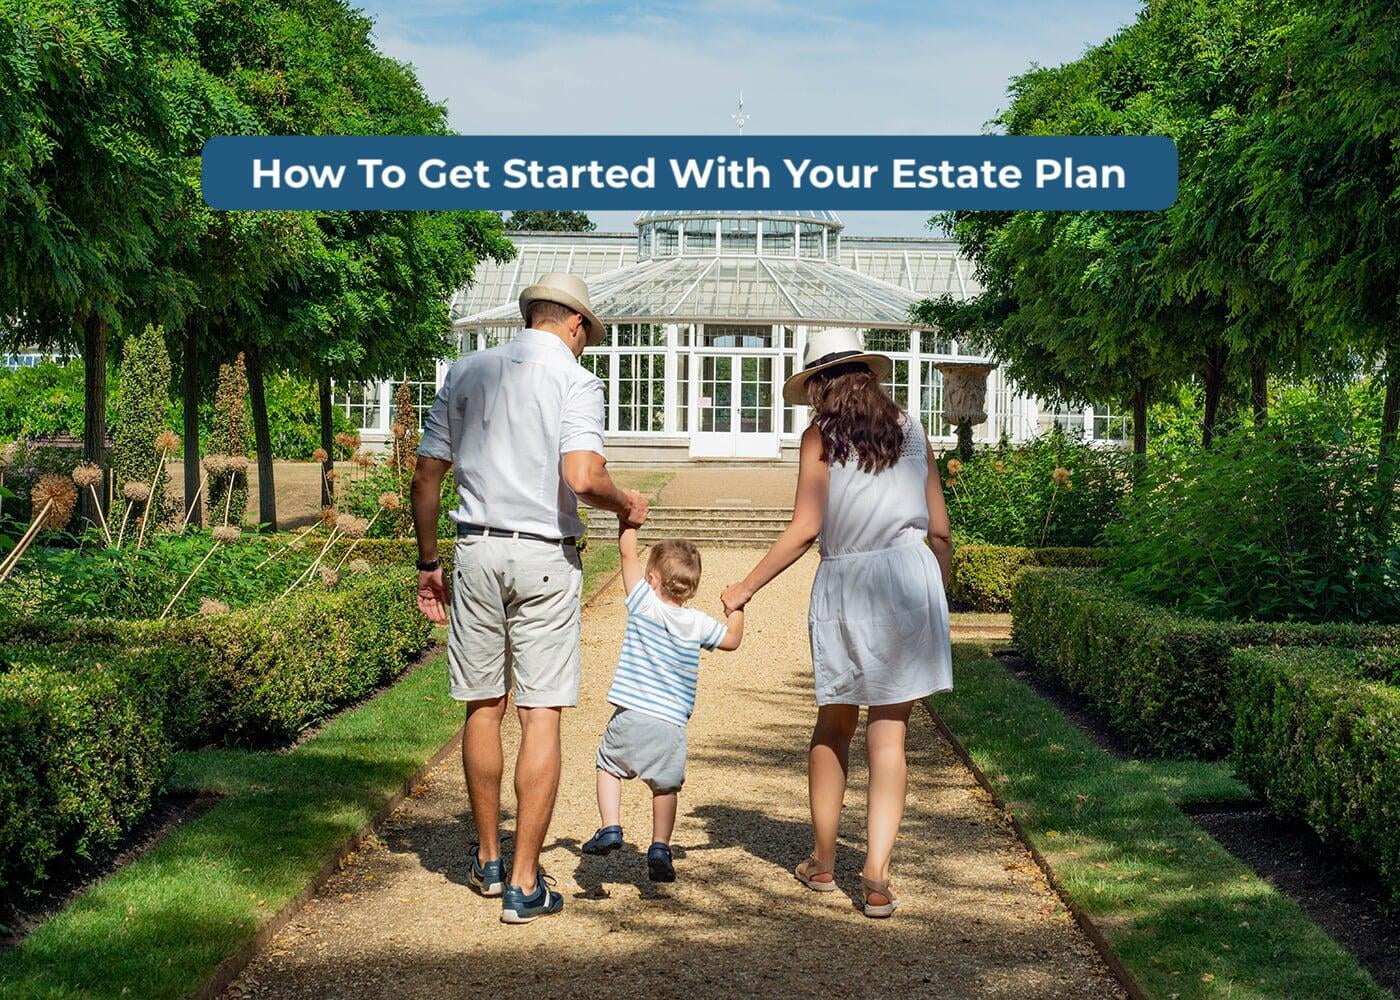 How to Get Started With Your Estate Plan